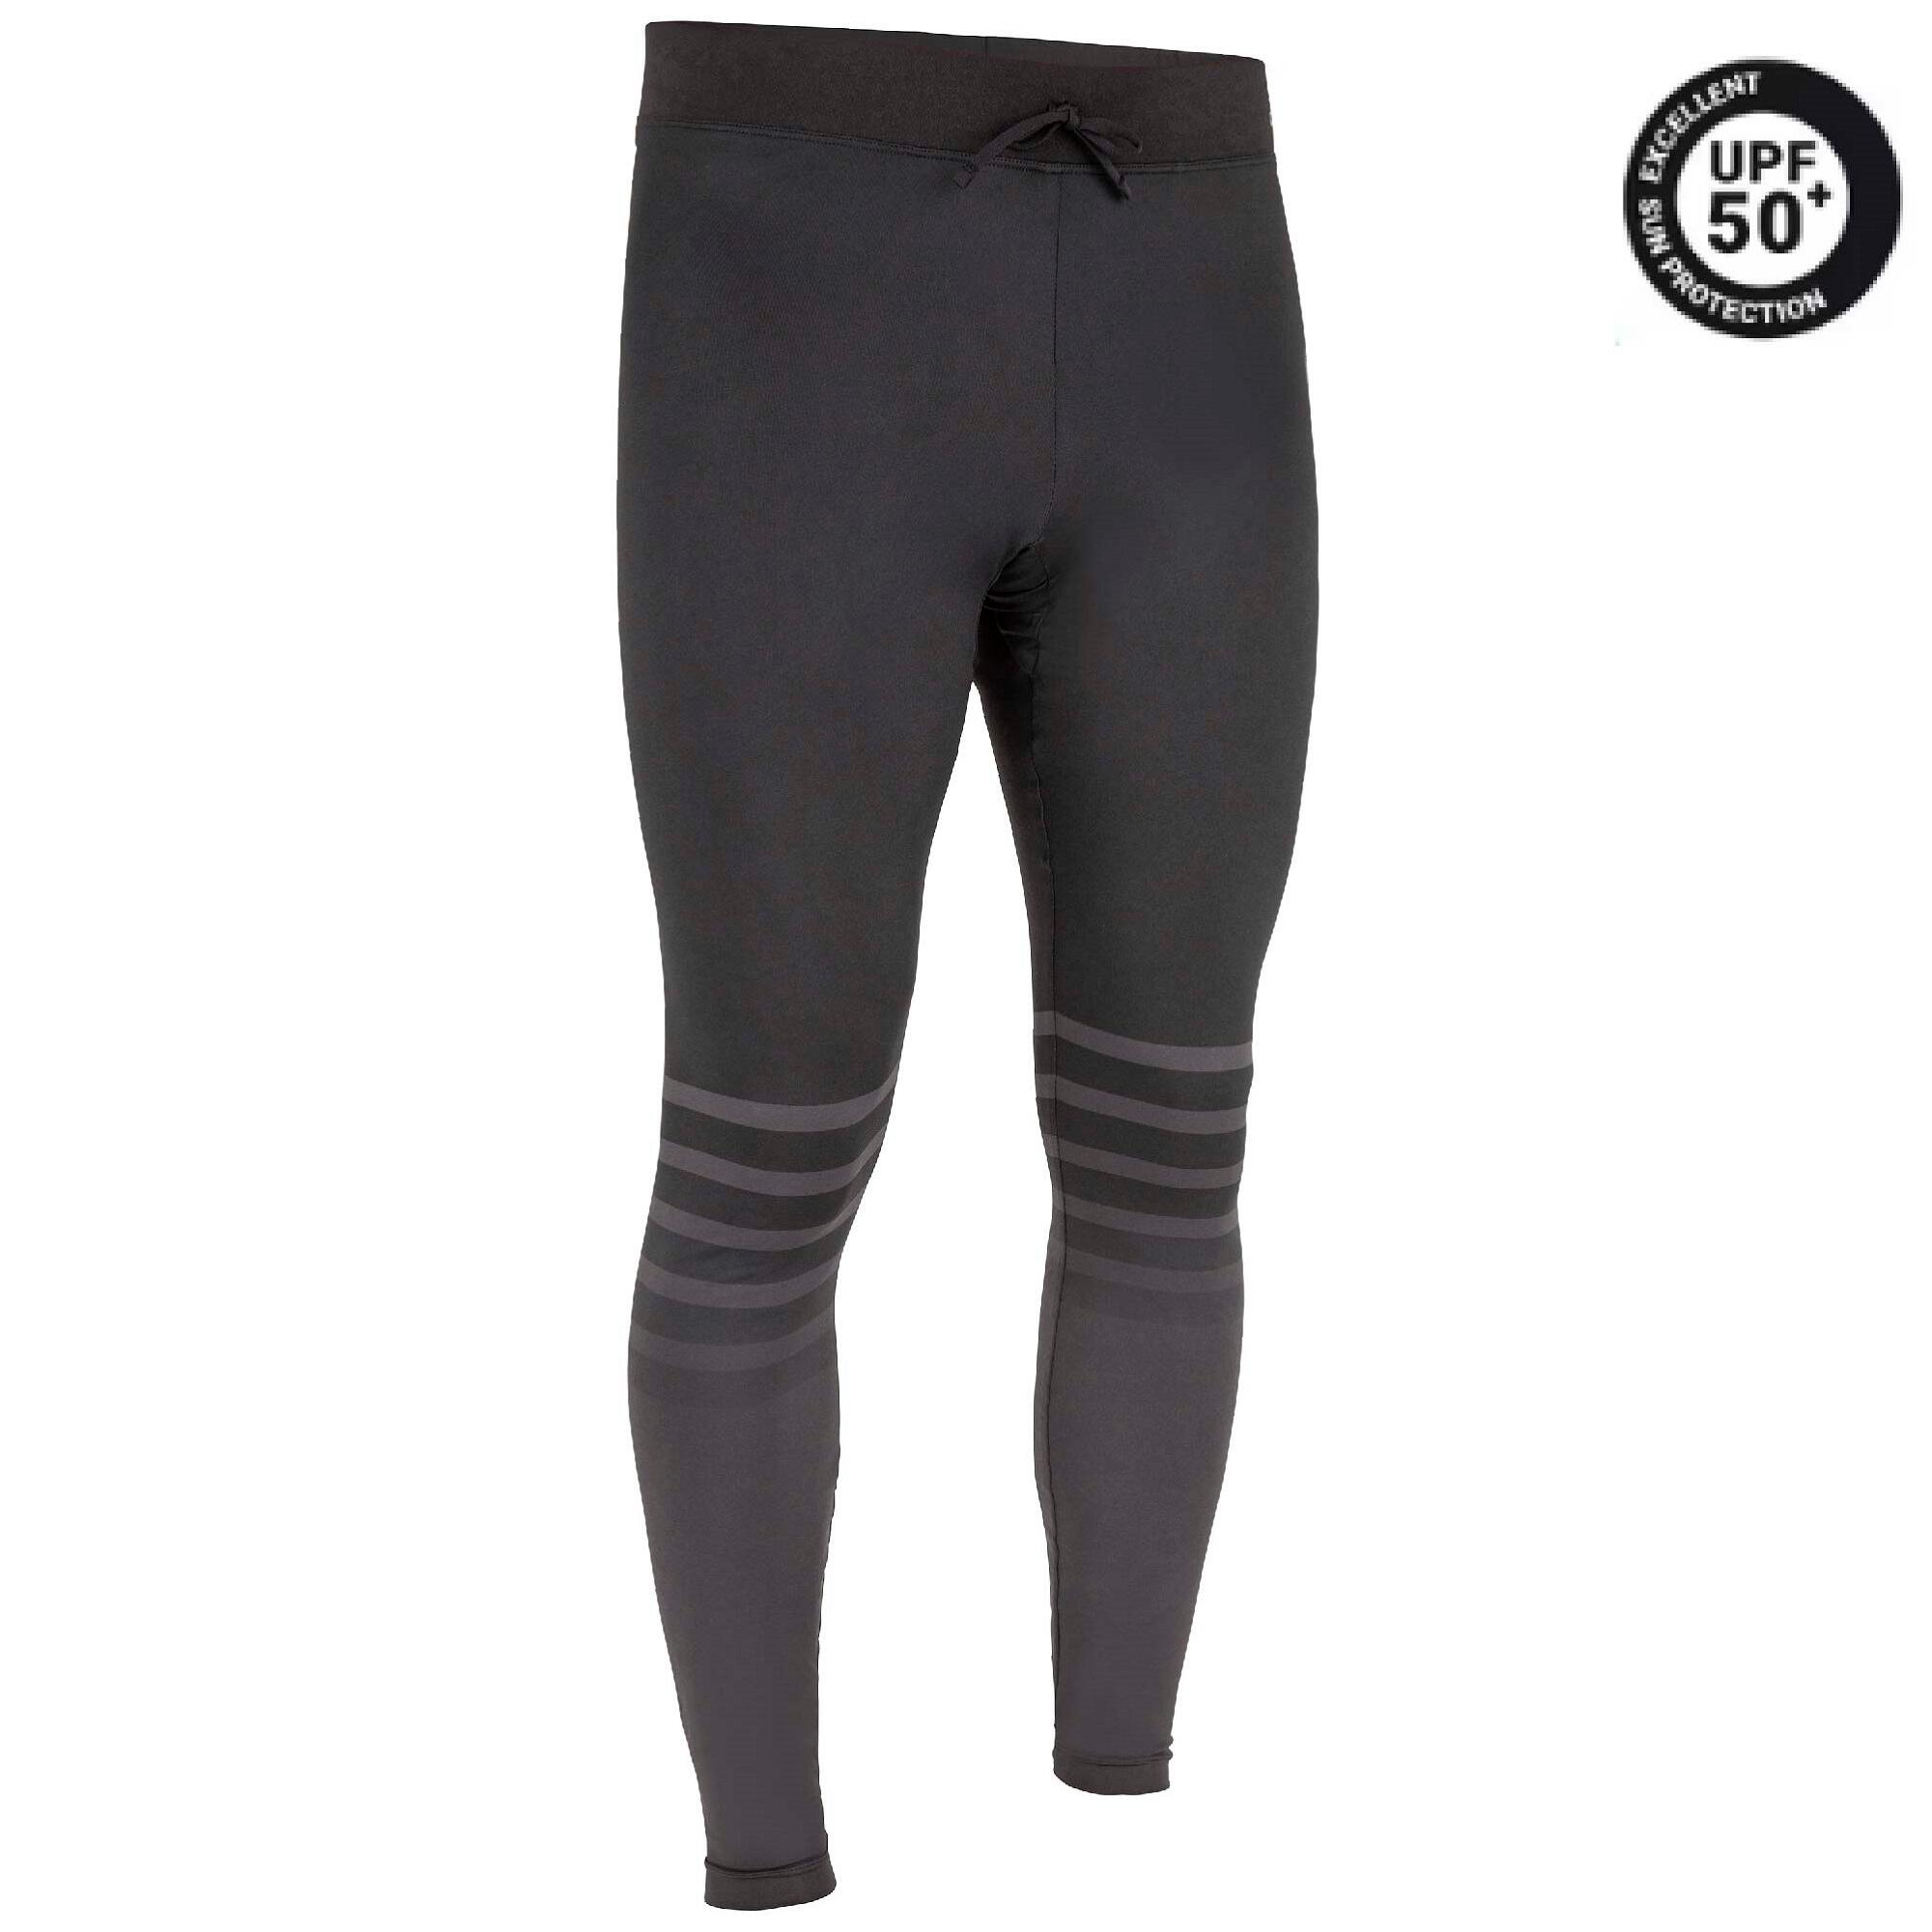 Mens Compression Pants, Pants for UV Protection